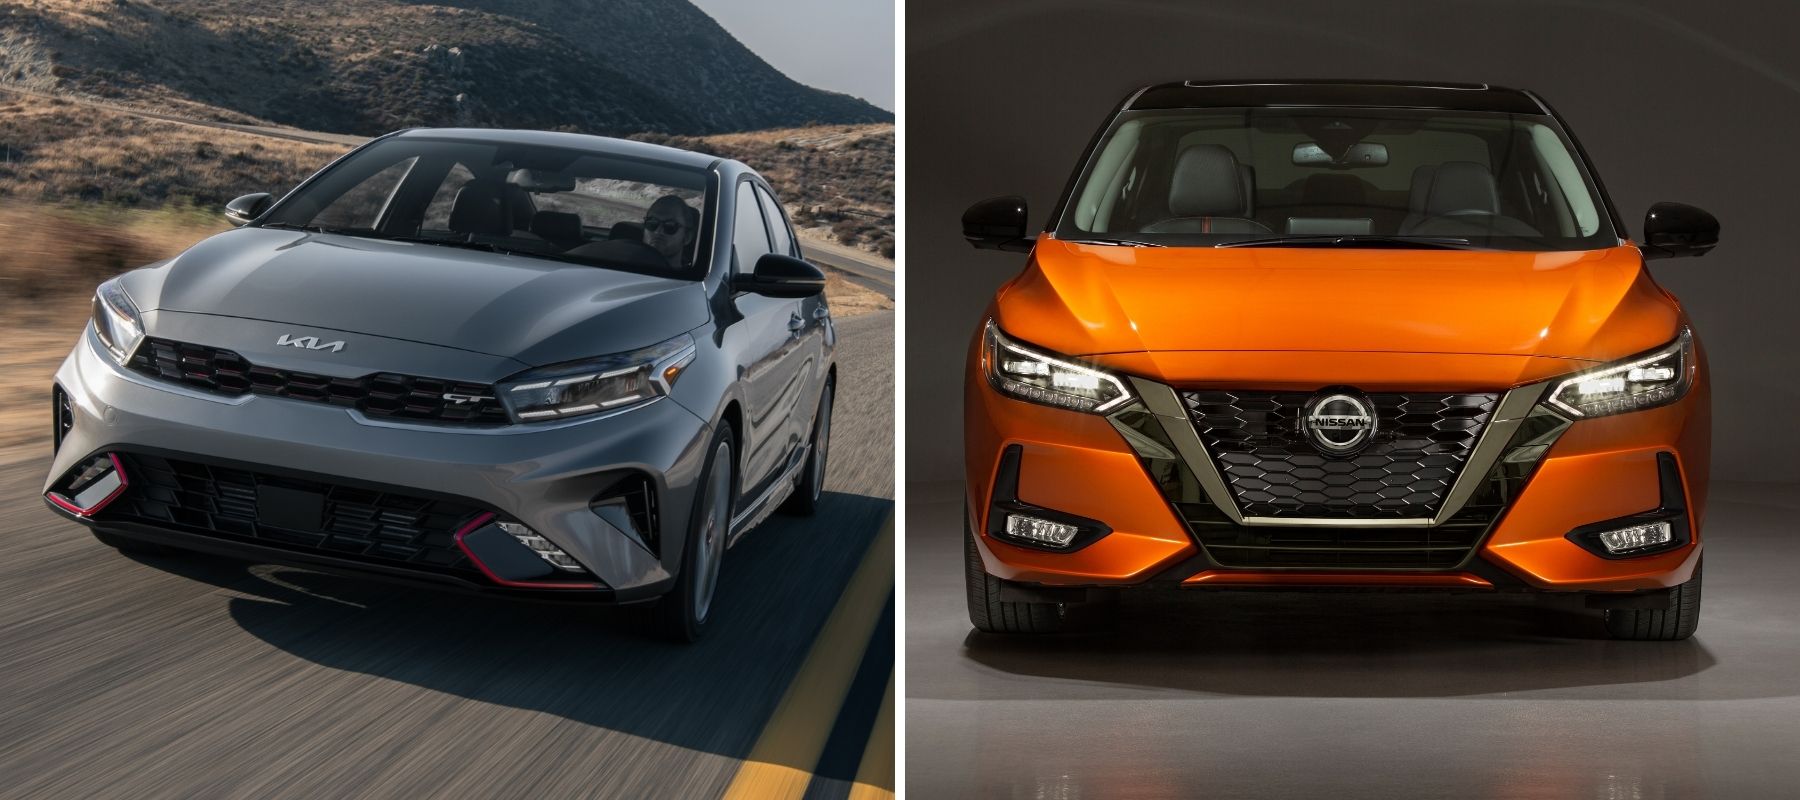 The 2022 Kia Forte in gray and the 2022 Nissan Sentra in orange compact sedan models